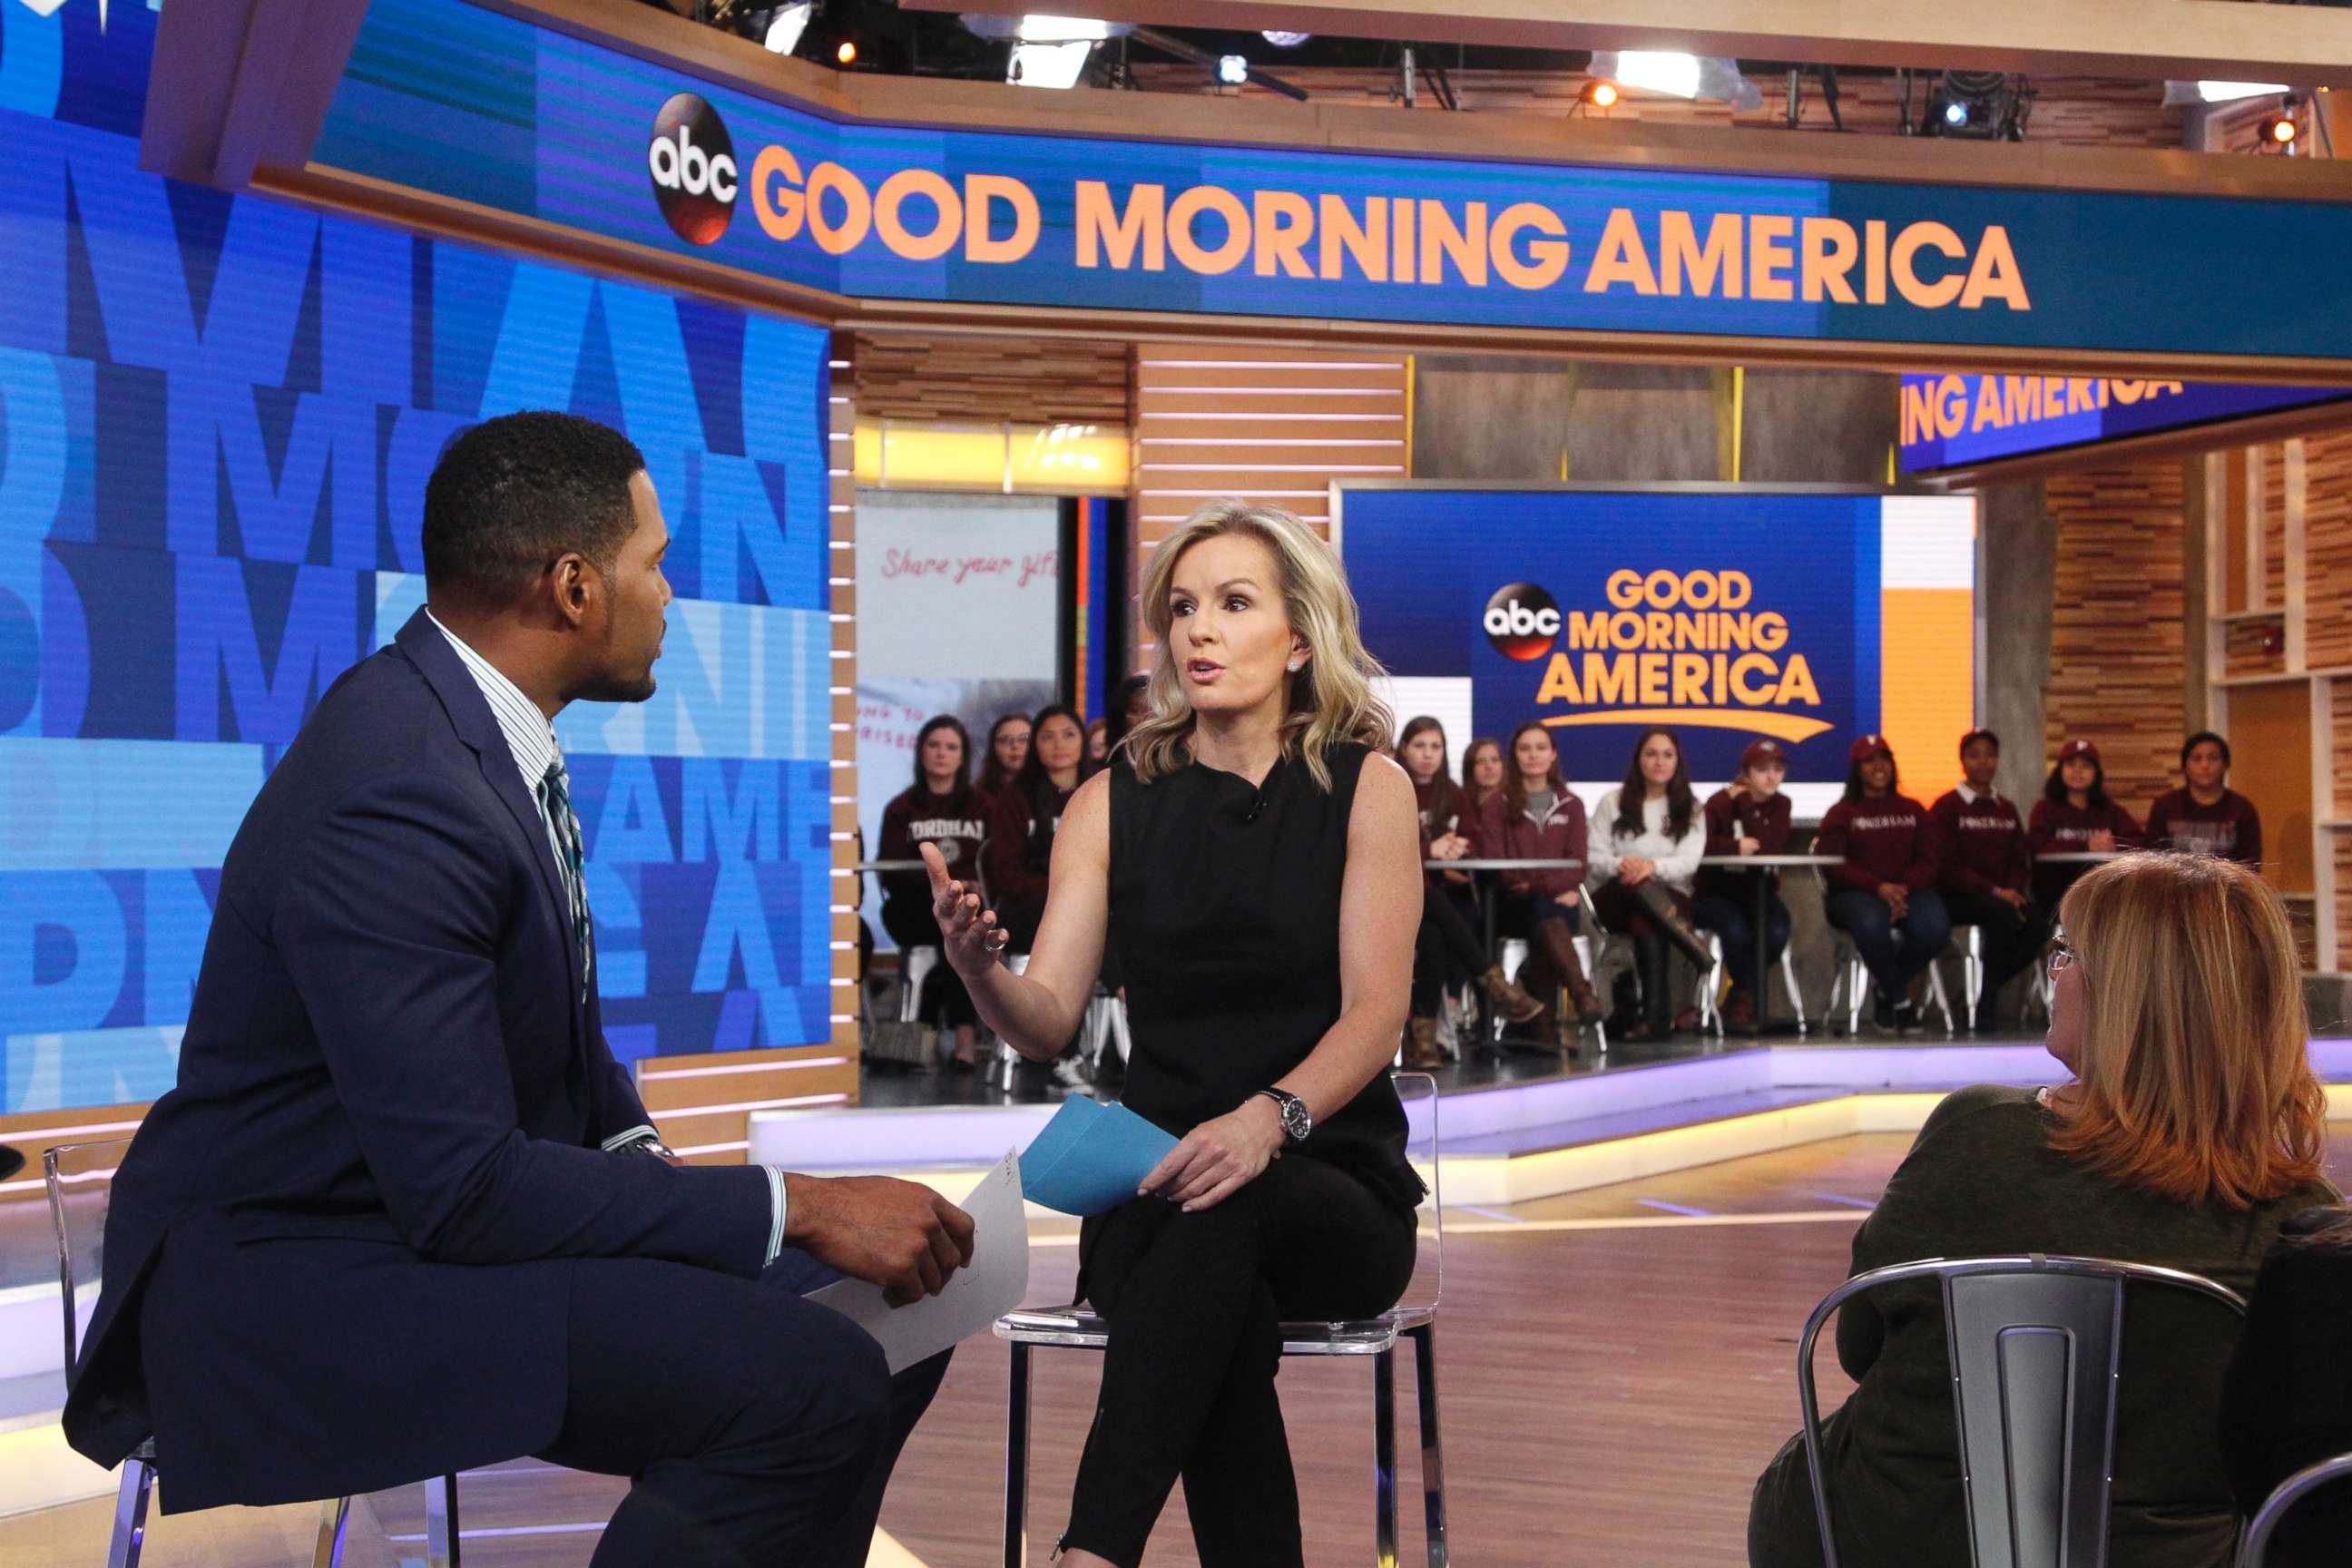 PHOTO: Dr. Jennifer Ashton is a guest on "Good Morning America," Jan. 31, 2017, airing on the ABC Television Network.